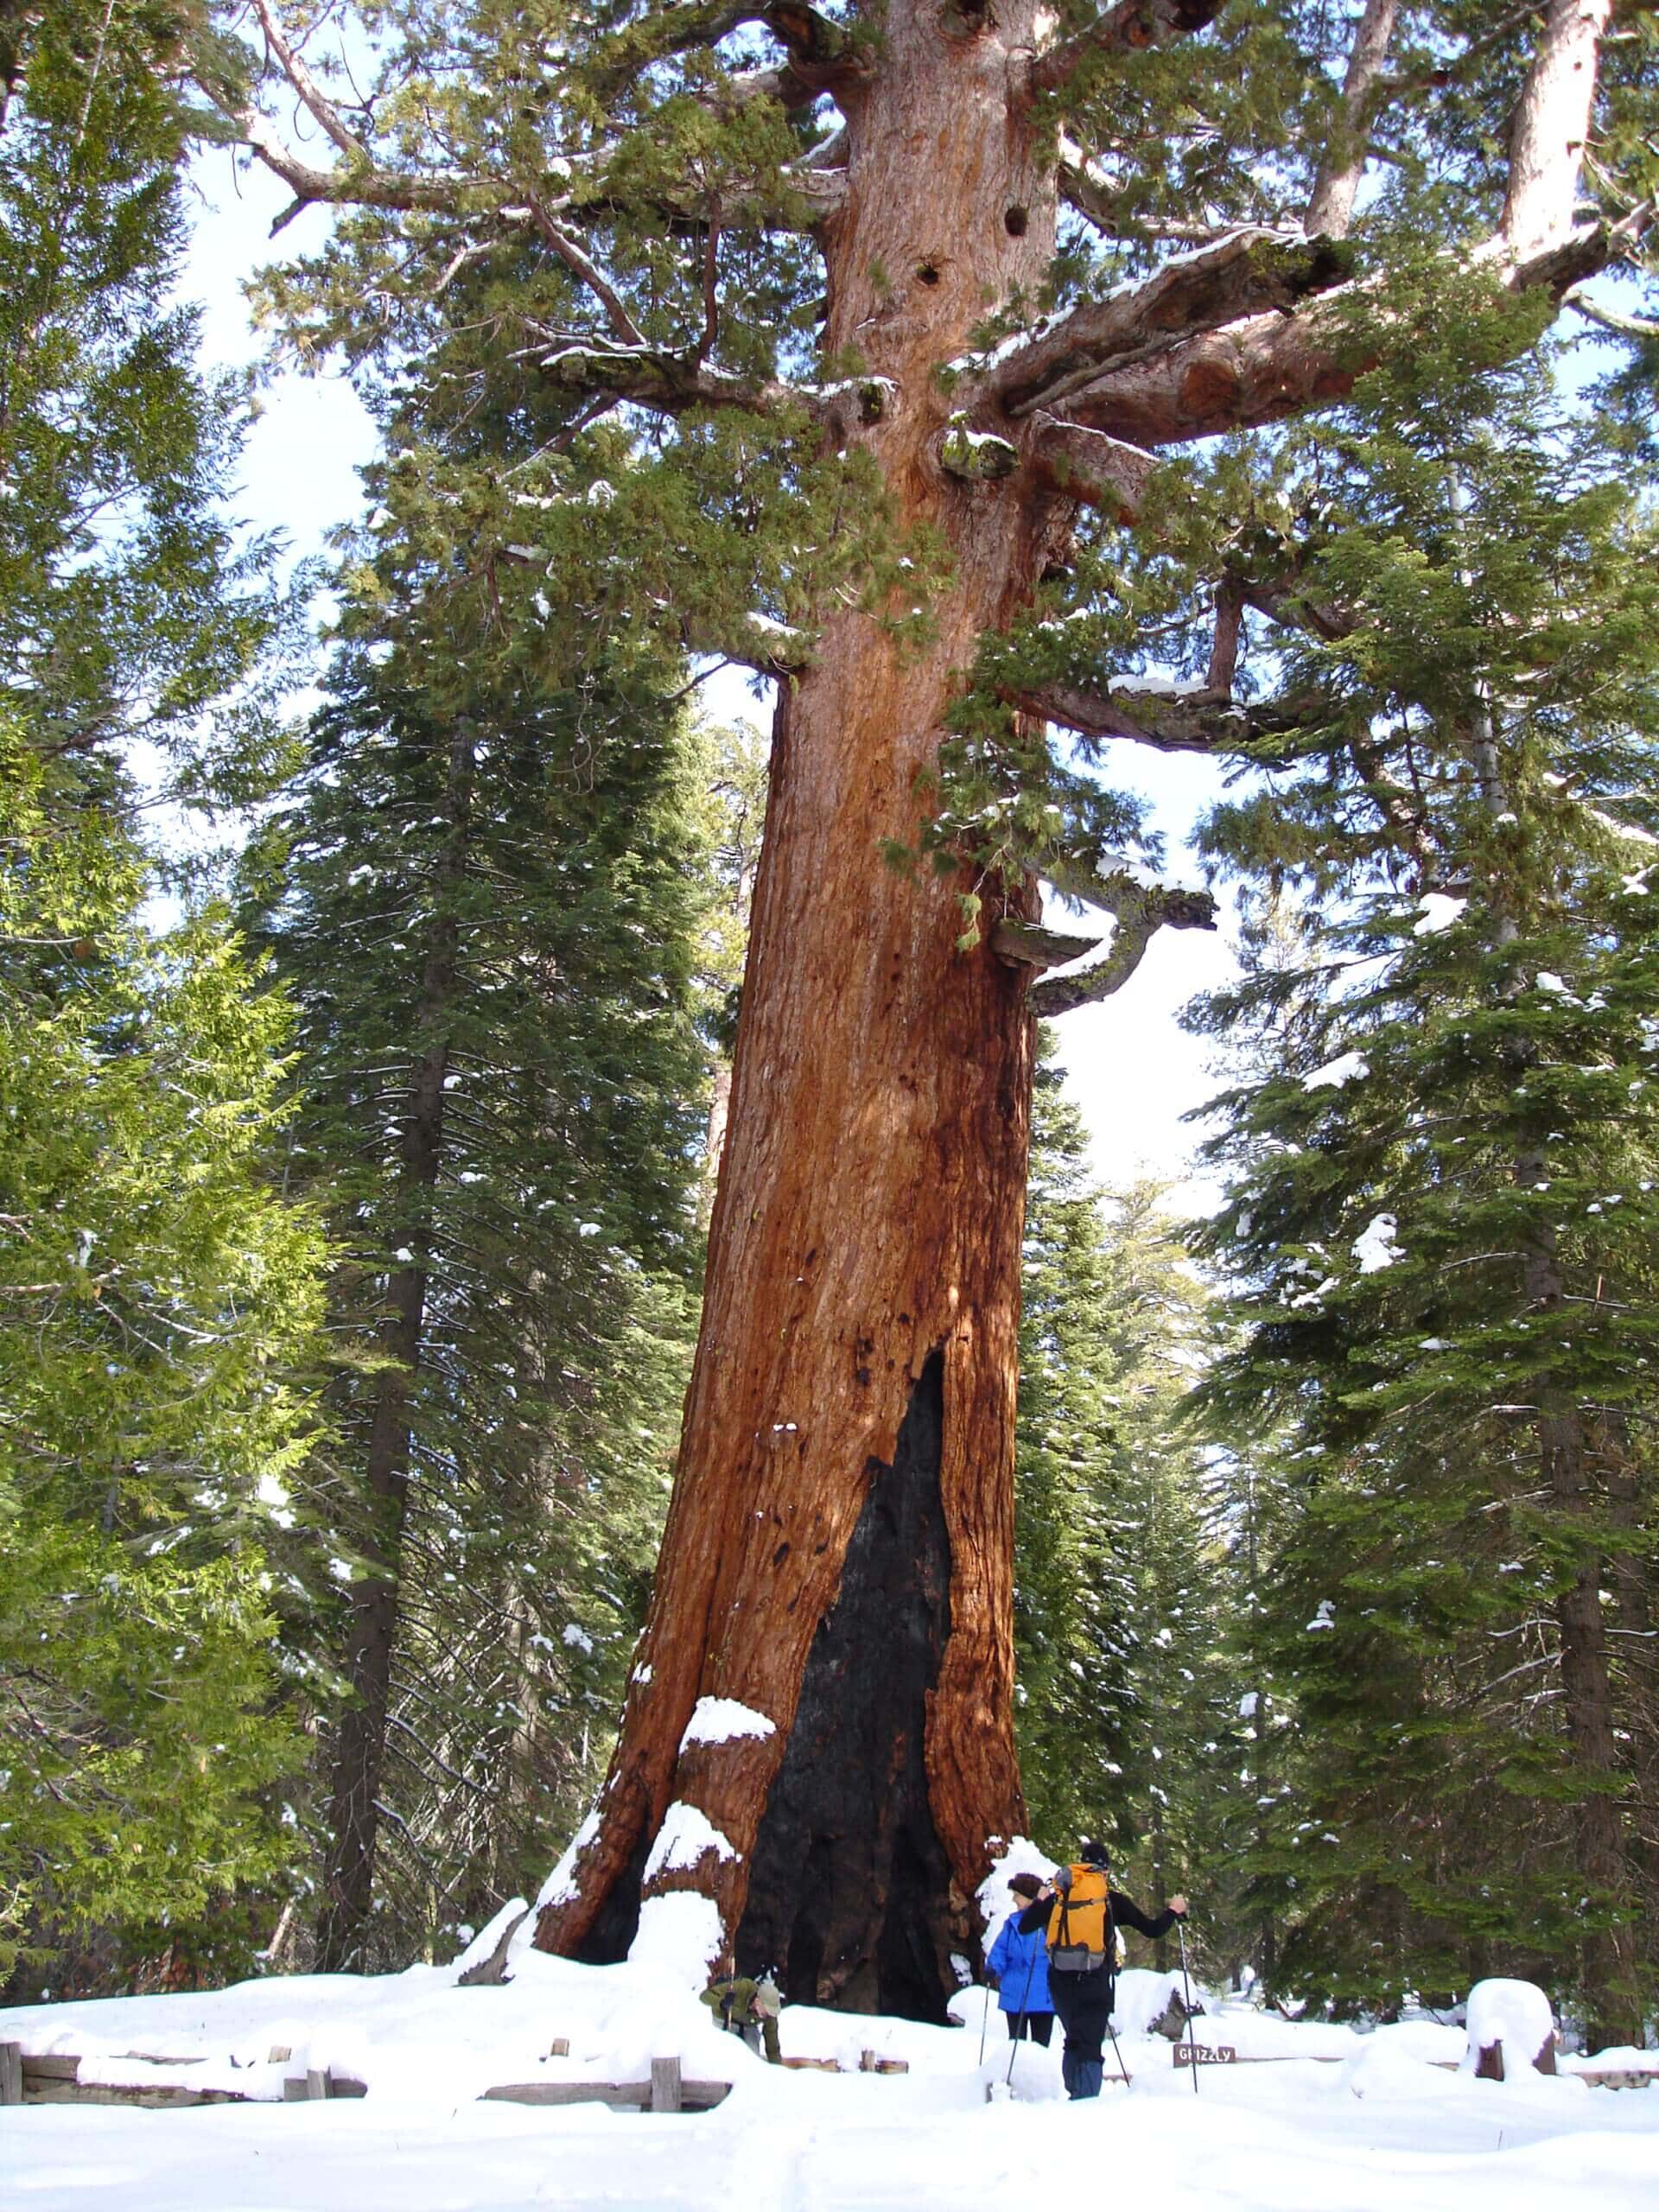 Skiing and snowsheing in the Mariposa Grove of Giant Sequoias